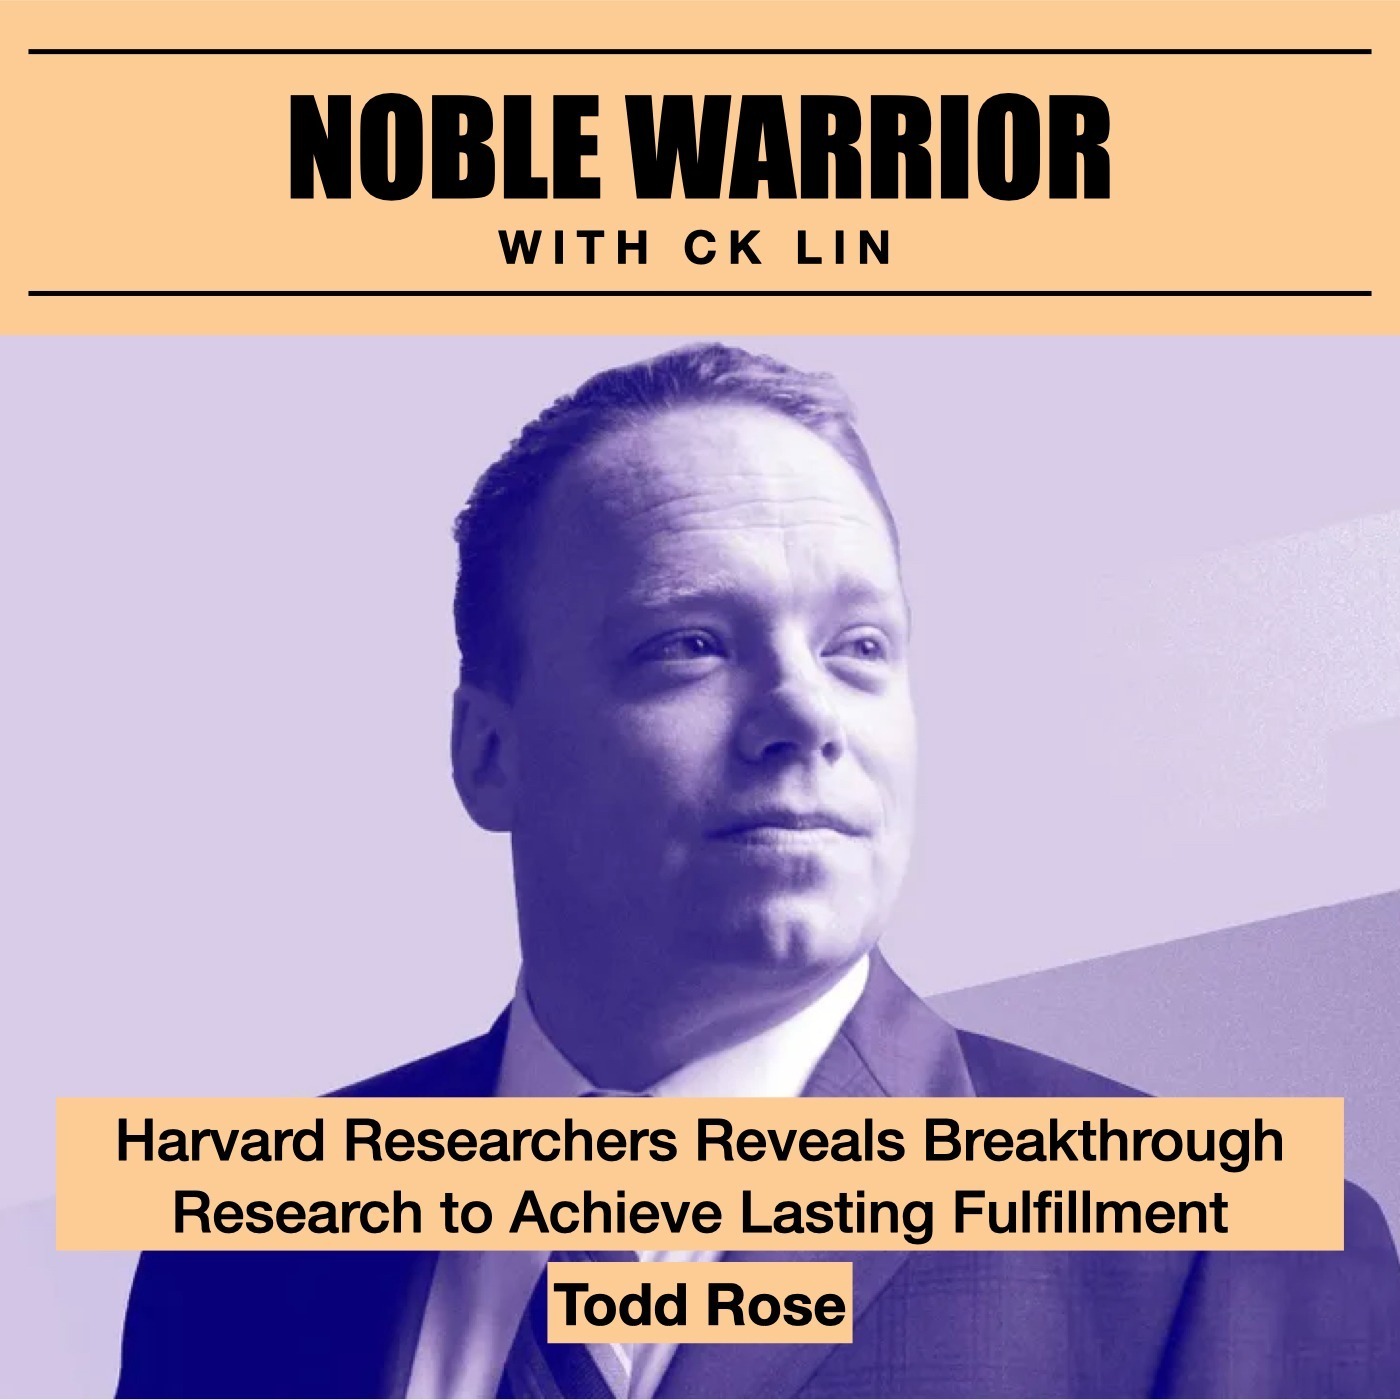 132 Todd Rose: Harvard Researchers Revealed Breakthrough Research to Achieve Lasting Fulfillment Image